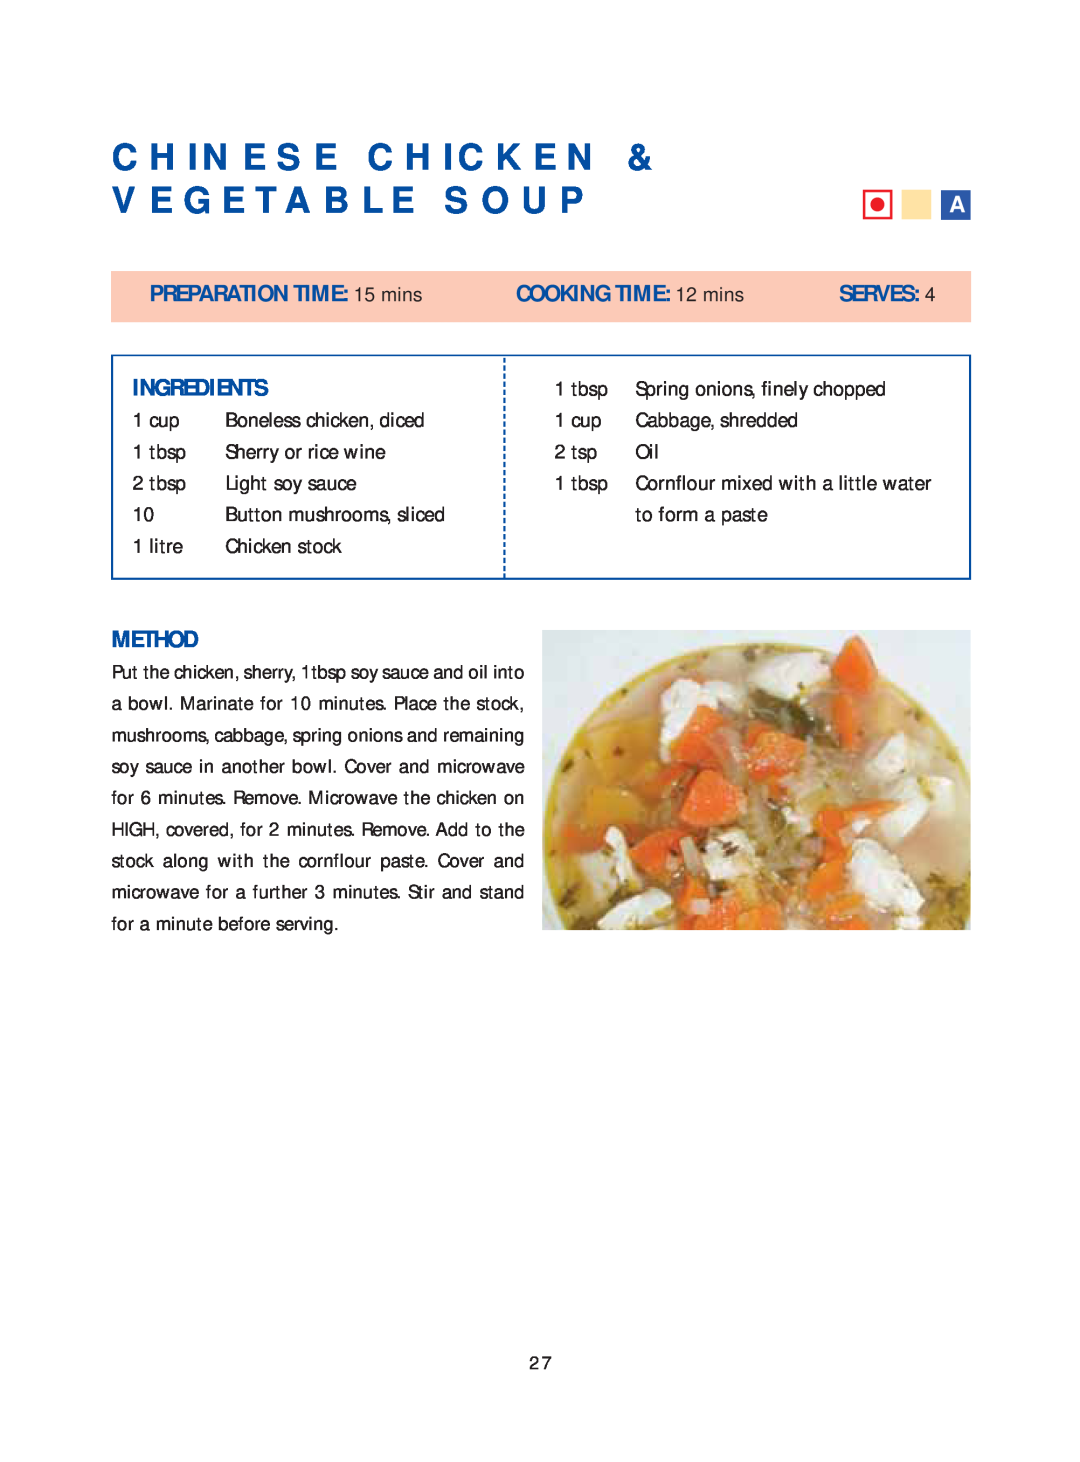 Samsung Microwave Oven Chinese Chicken & Vegetable Soup, PREPARATION TIME: 15 mins, COOKING TIME: 12 mins, Serves, Method 